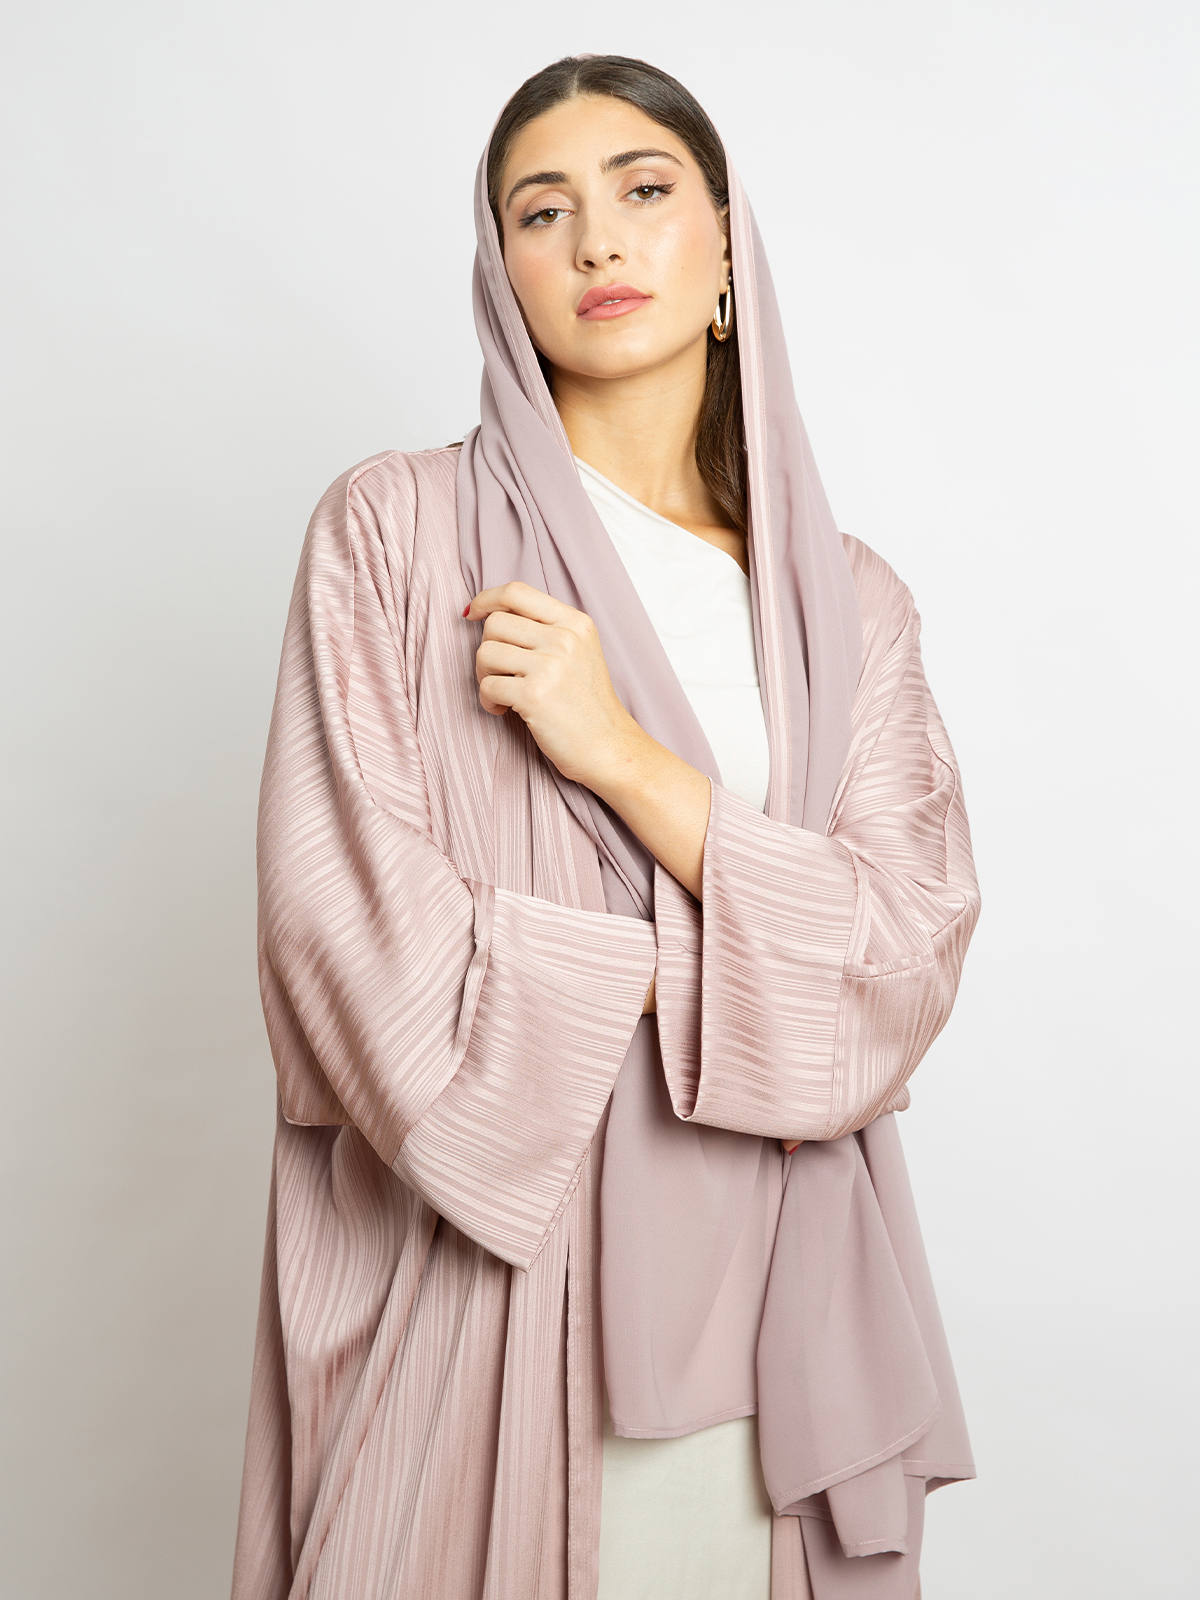 Long open wide cut abaya in pink stripes color with regular sleeves for special occasions and events